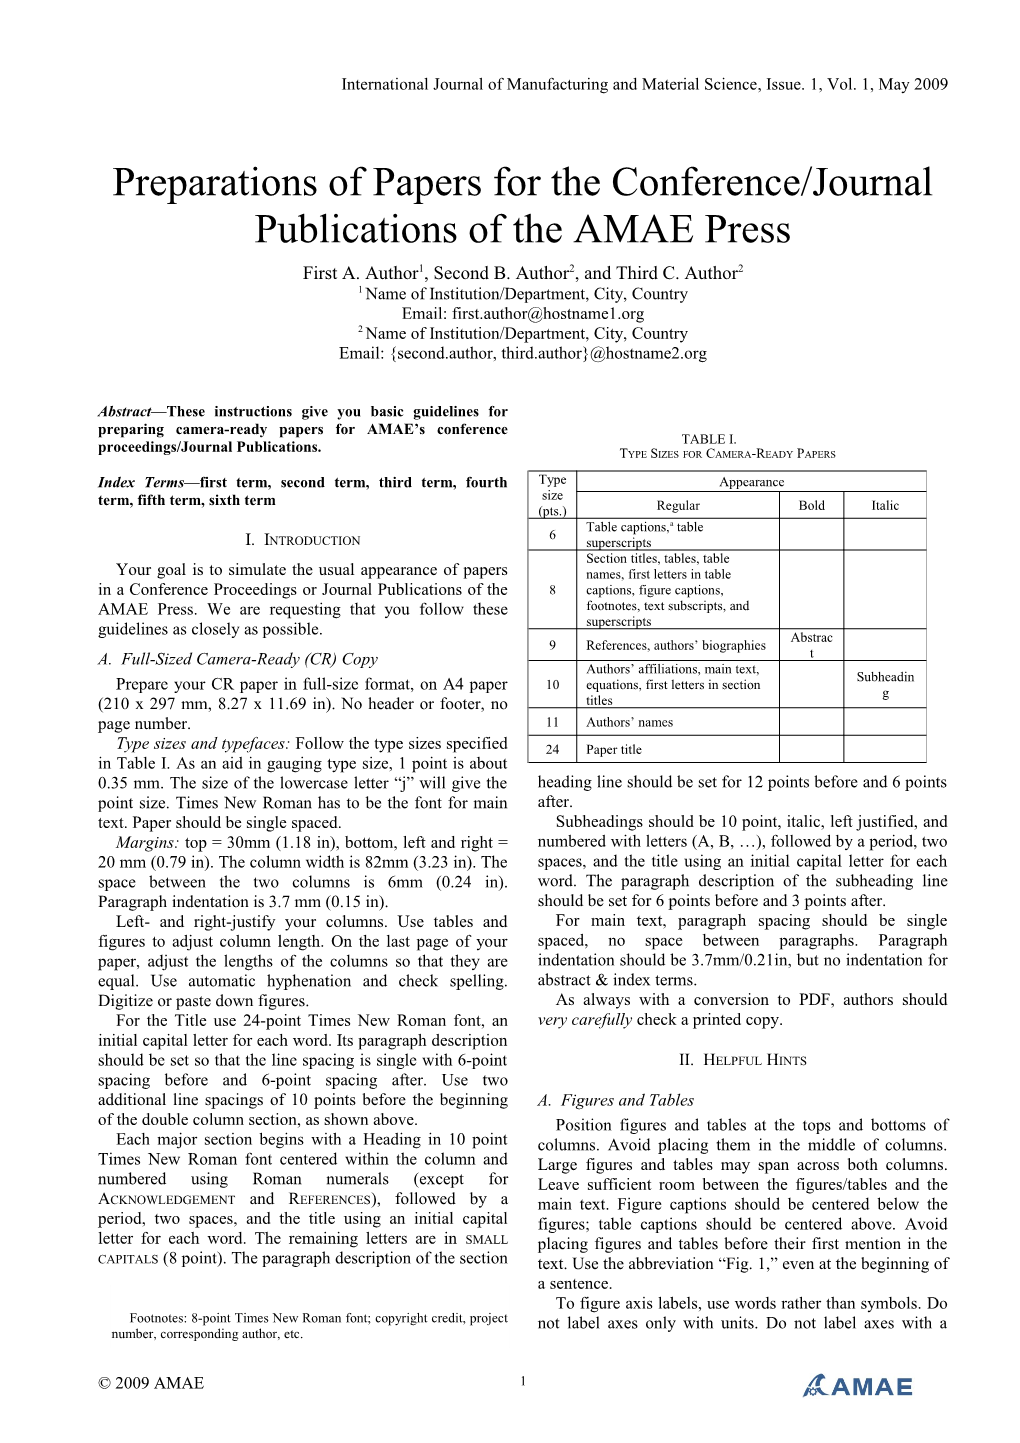 Preparations of Papers for the Conference/Journalpublications of the Amaepress